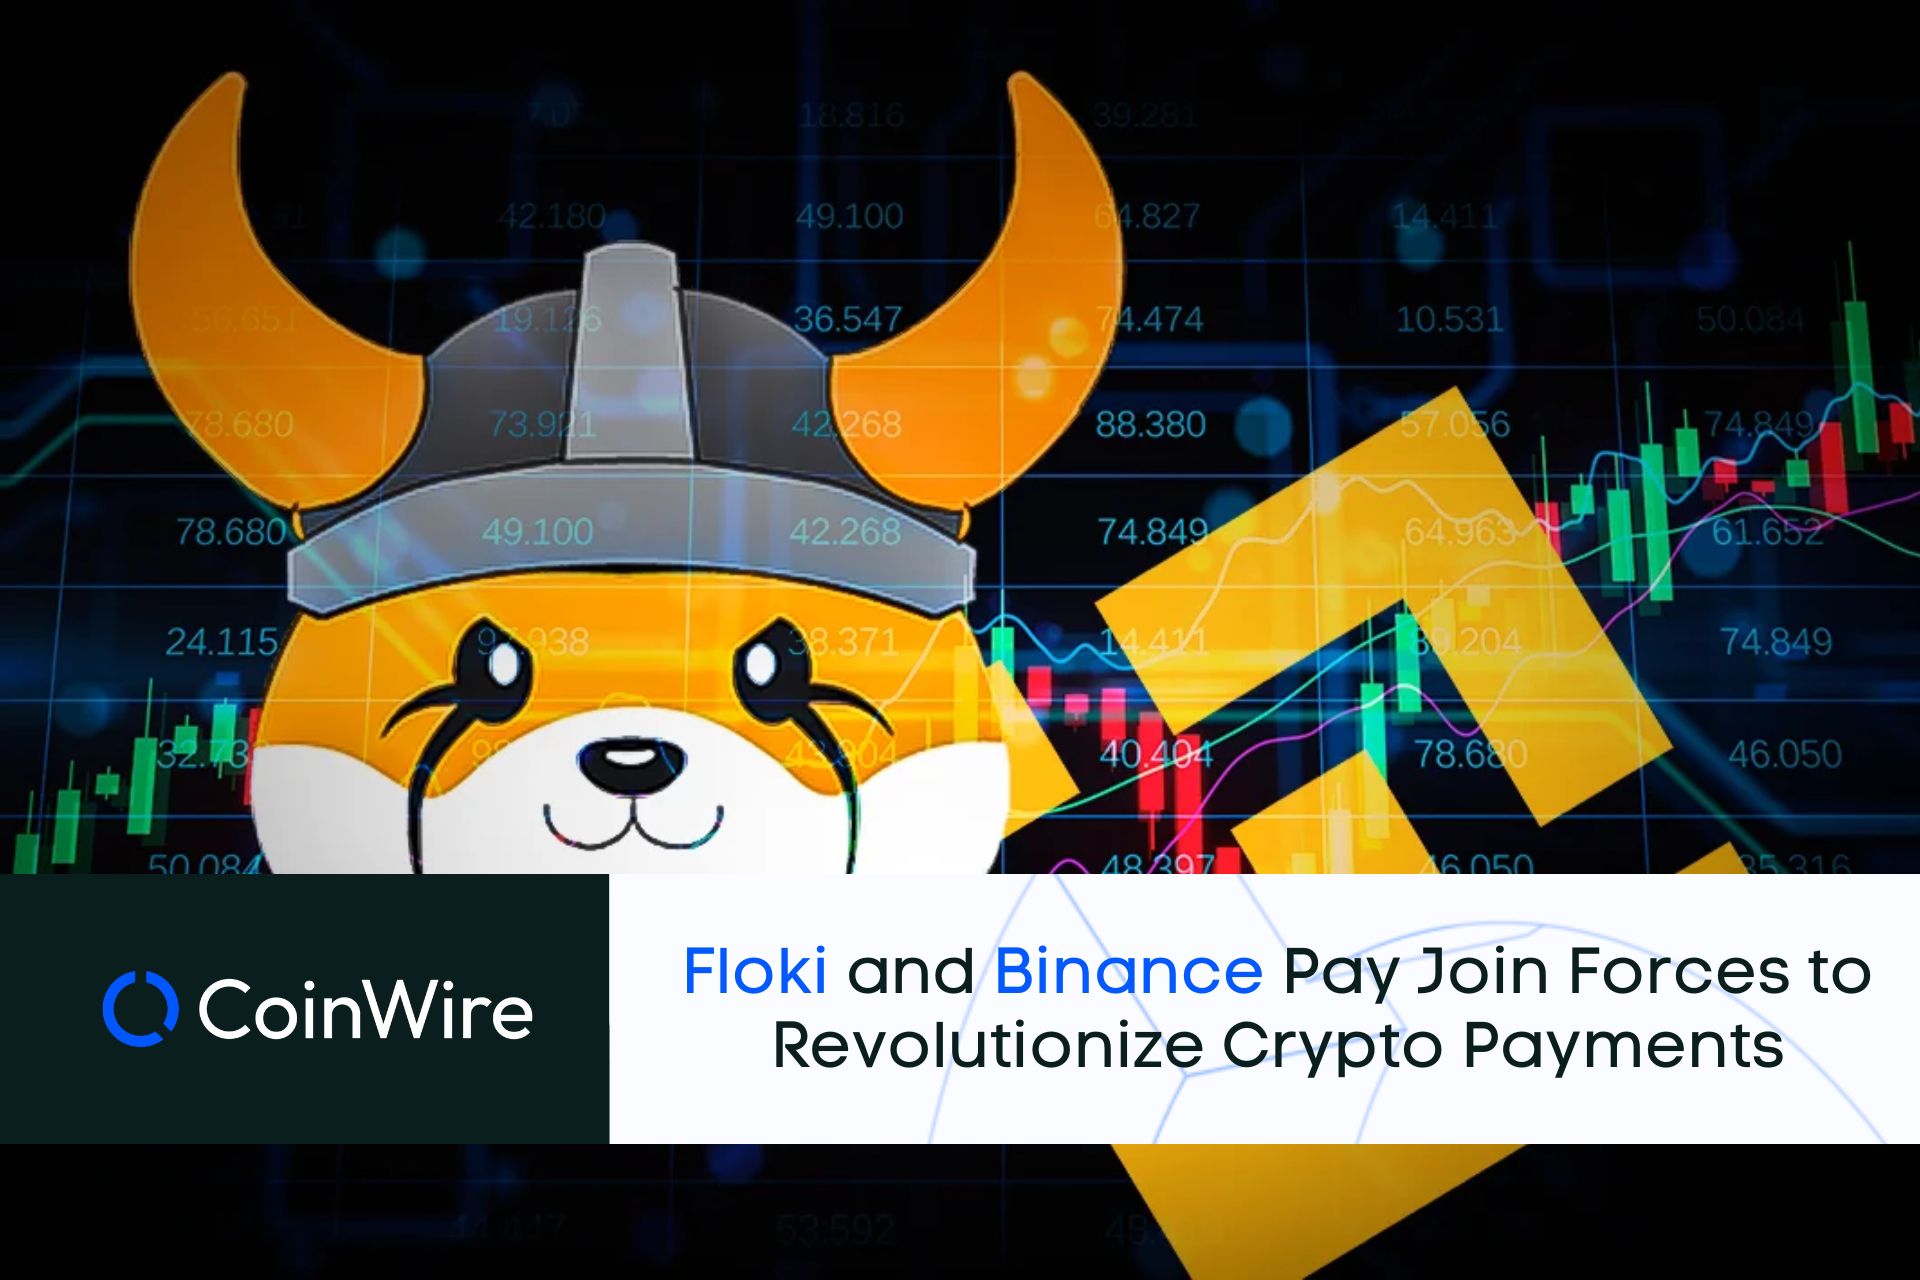 Floki And Binance Pay Join Forces To Revolutionize Crypto Payments